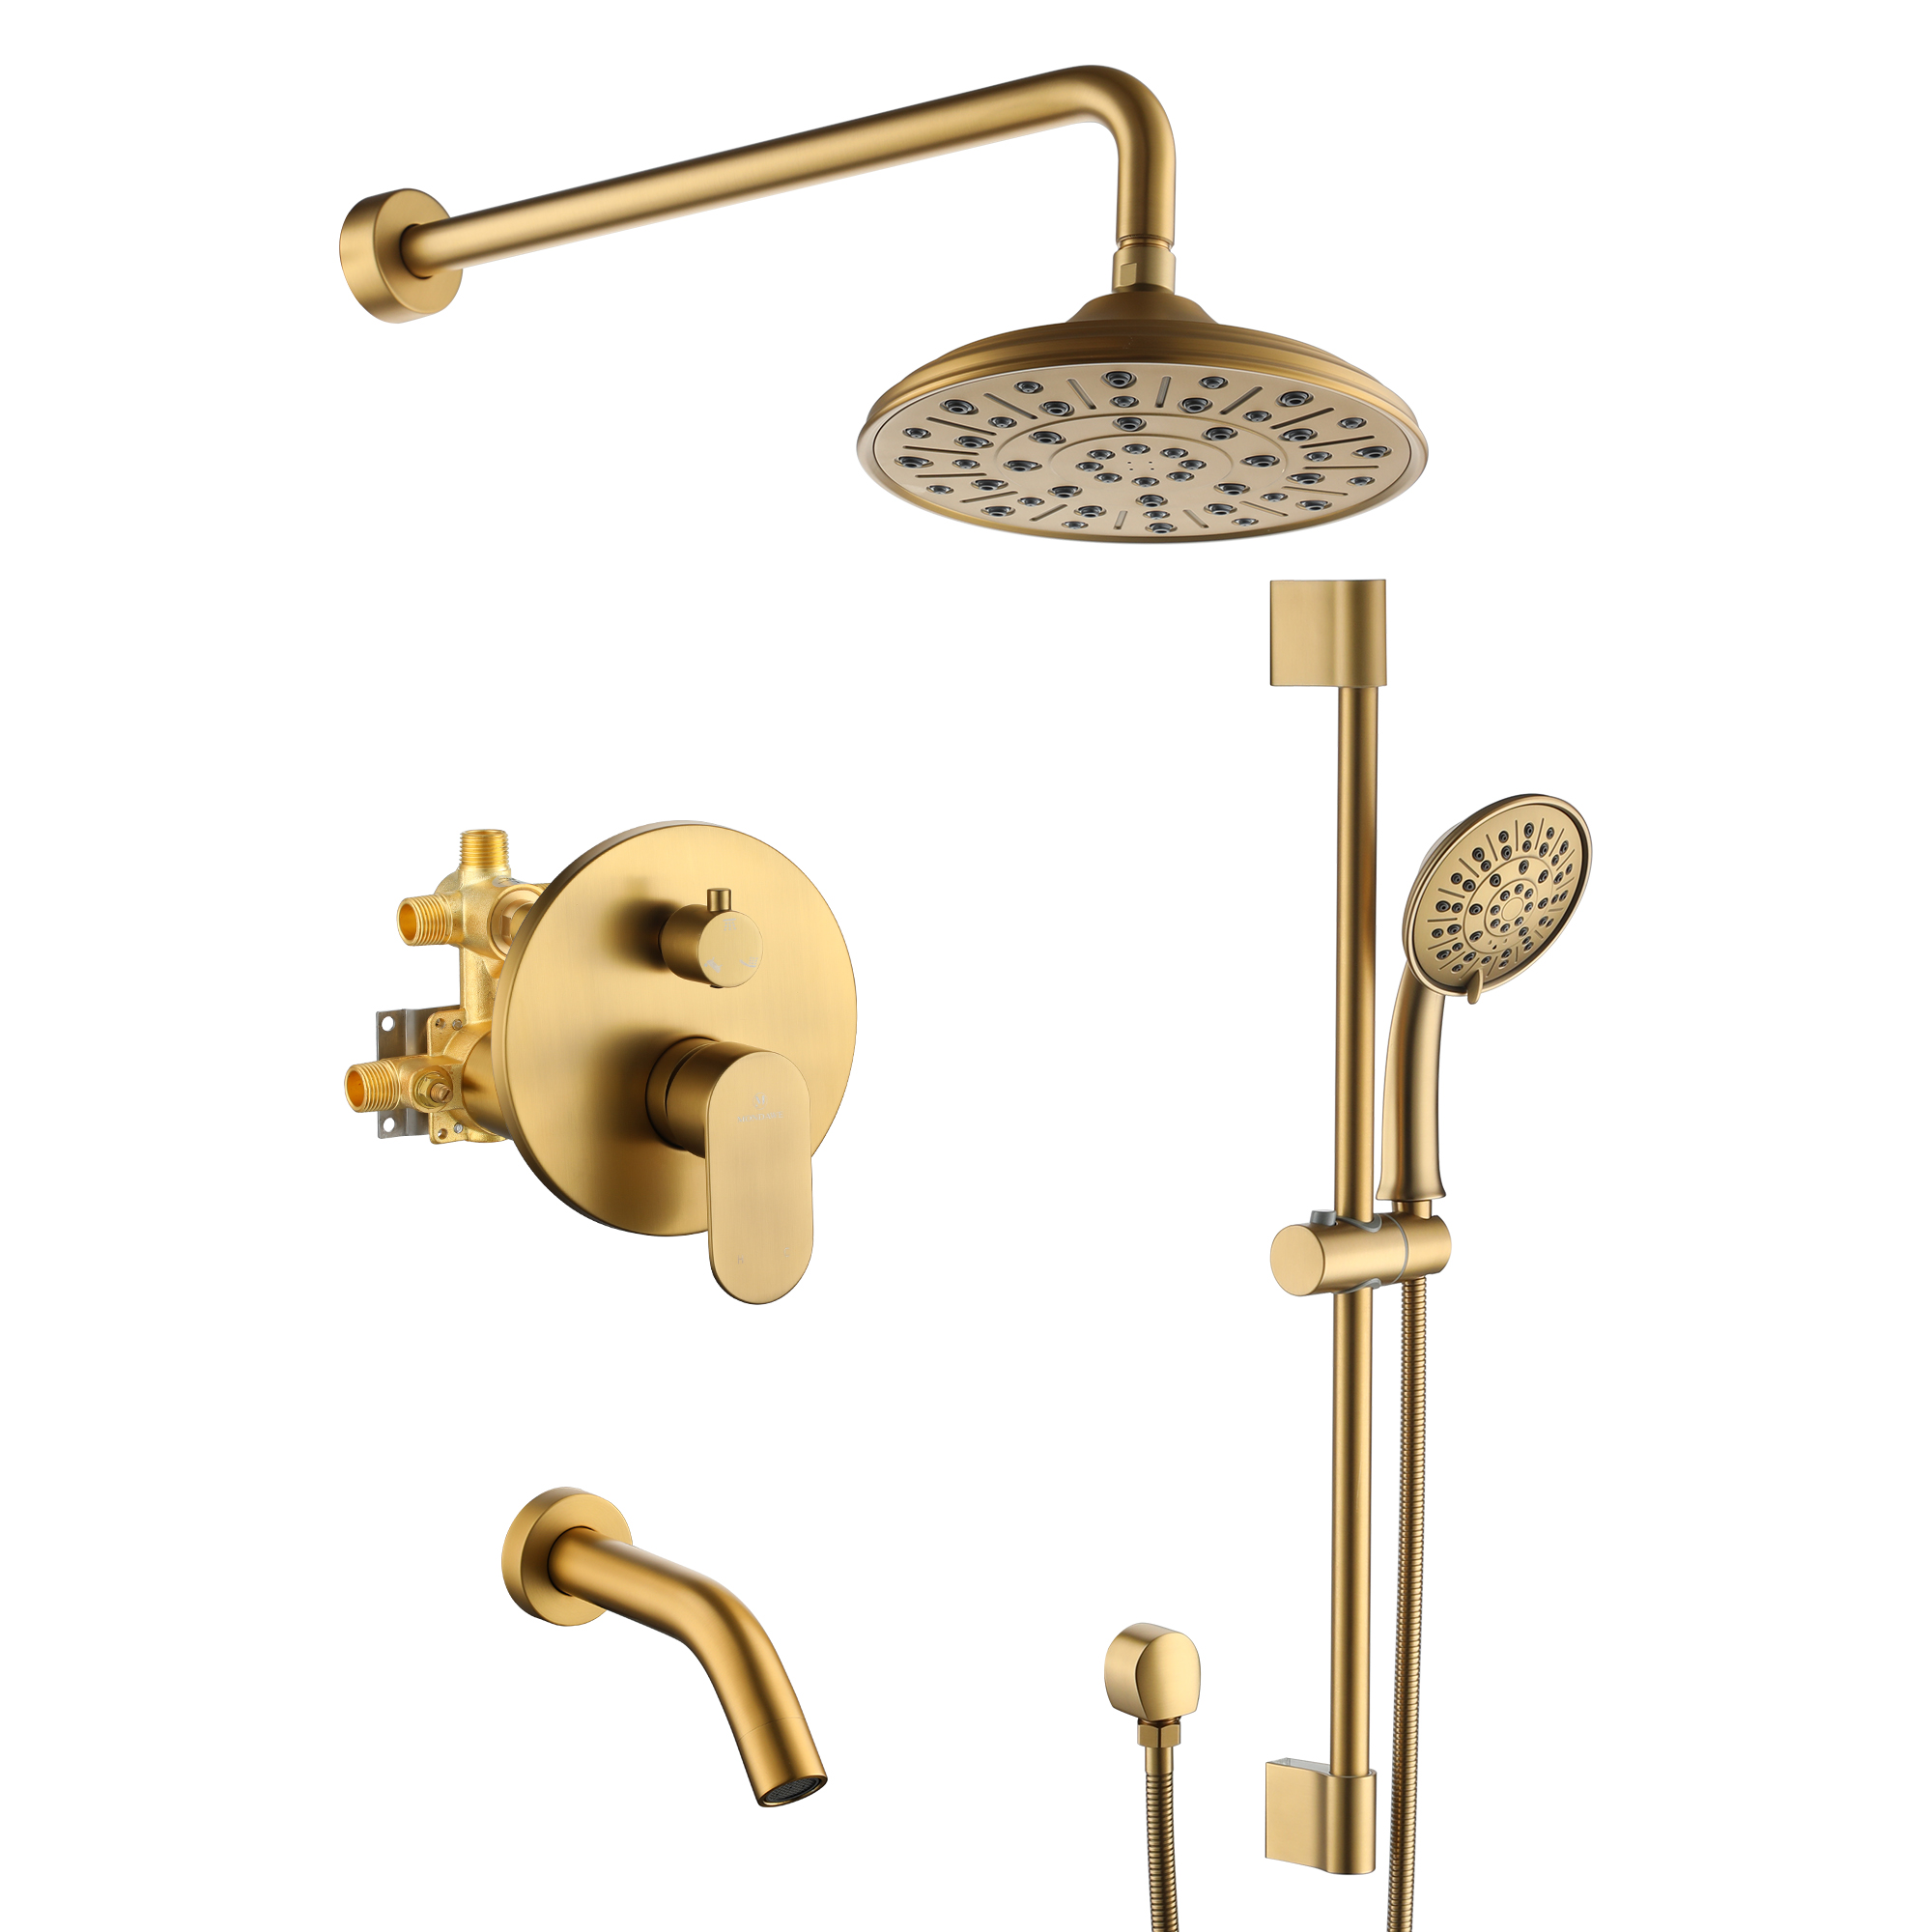 3815BG3Mondawe Retro Series 2-Spray Patterns with 1.8 GPM 8 in. Rain Wall Mount Dual Shower Heads with Handheld and Spout in Brushed Nickel/ Black/ Bronze/Brushed Gold